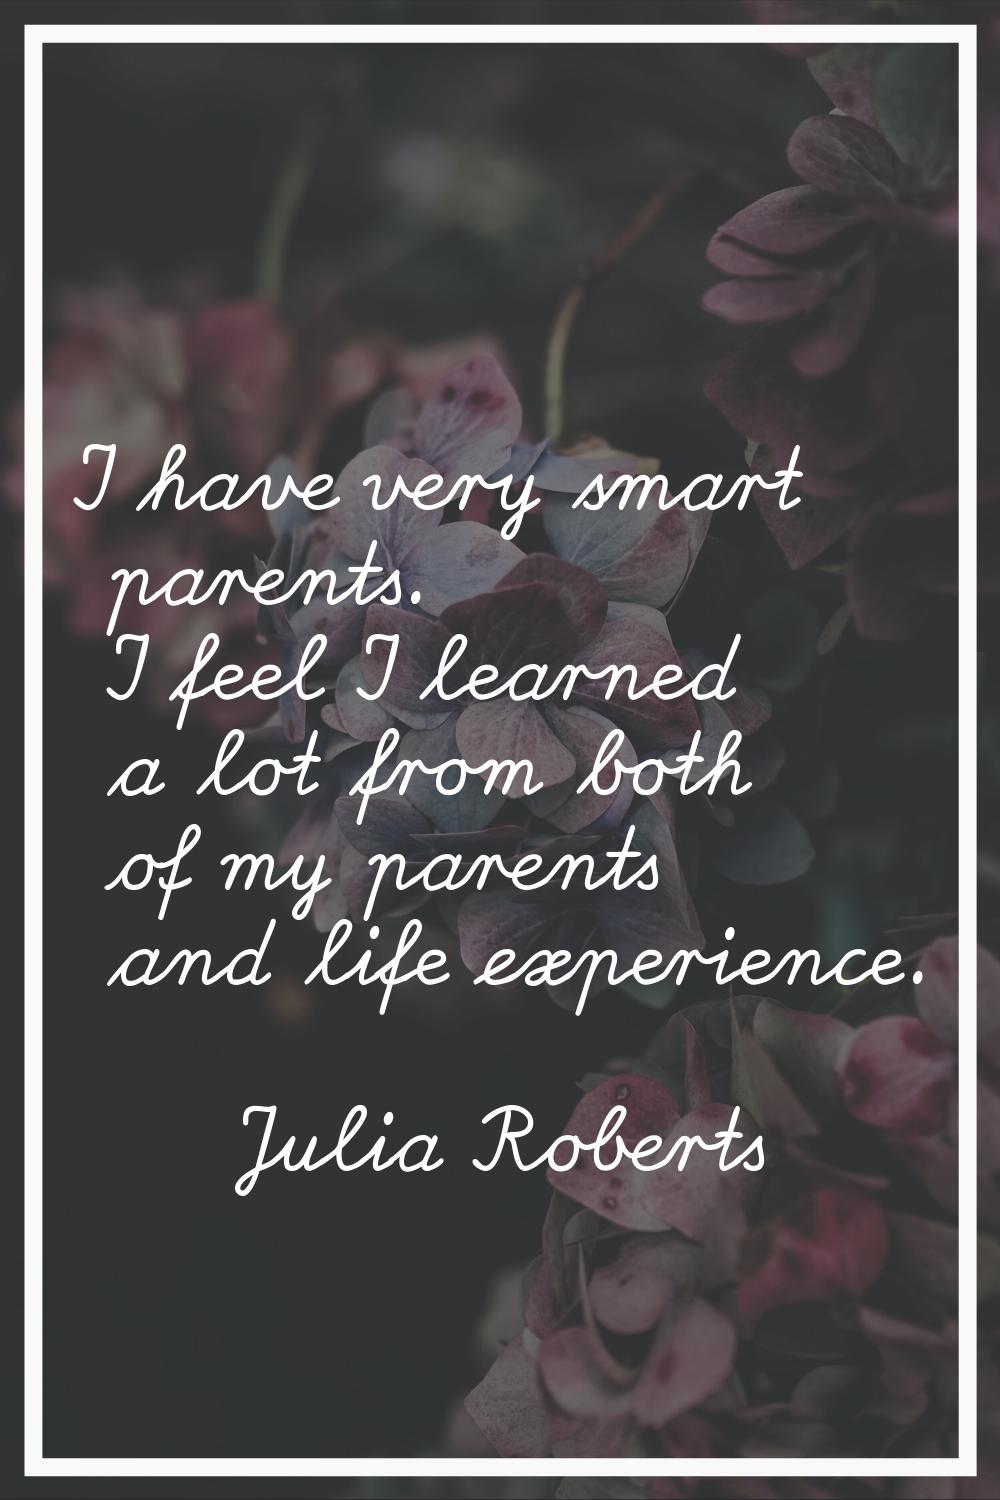 I have very smart parents. I feel I learned a lot from both of my parents and life experience.